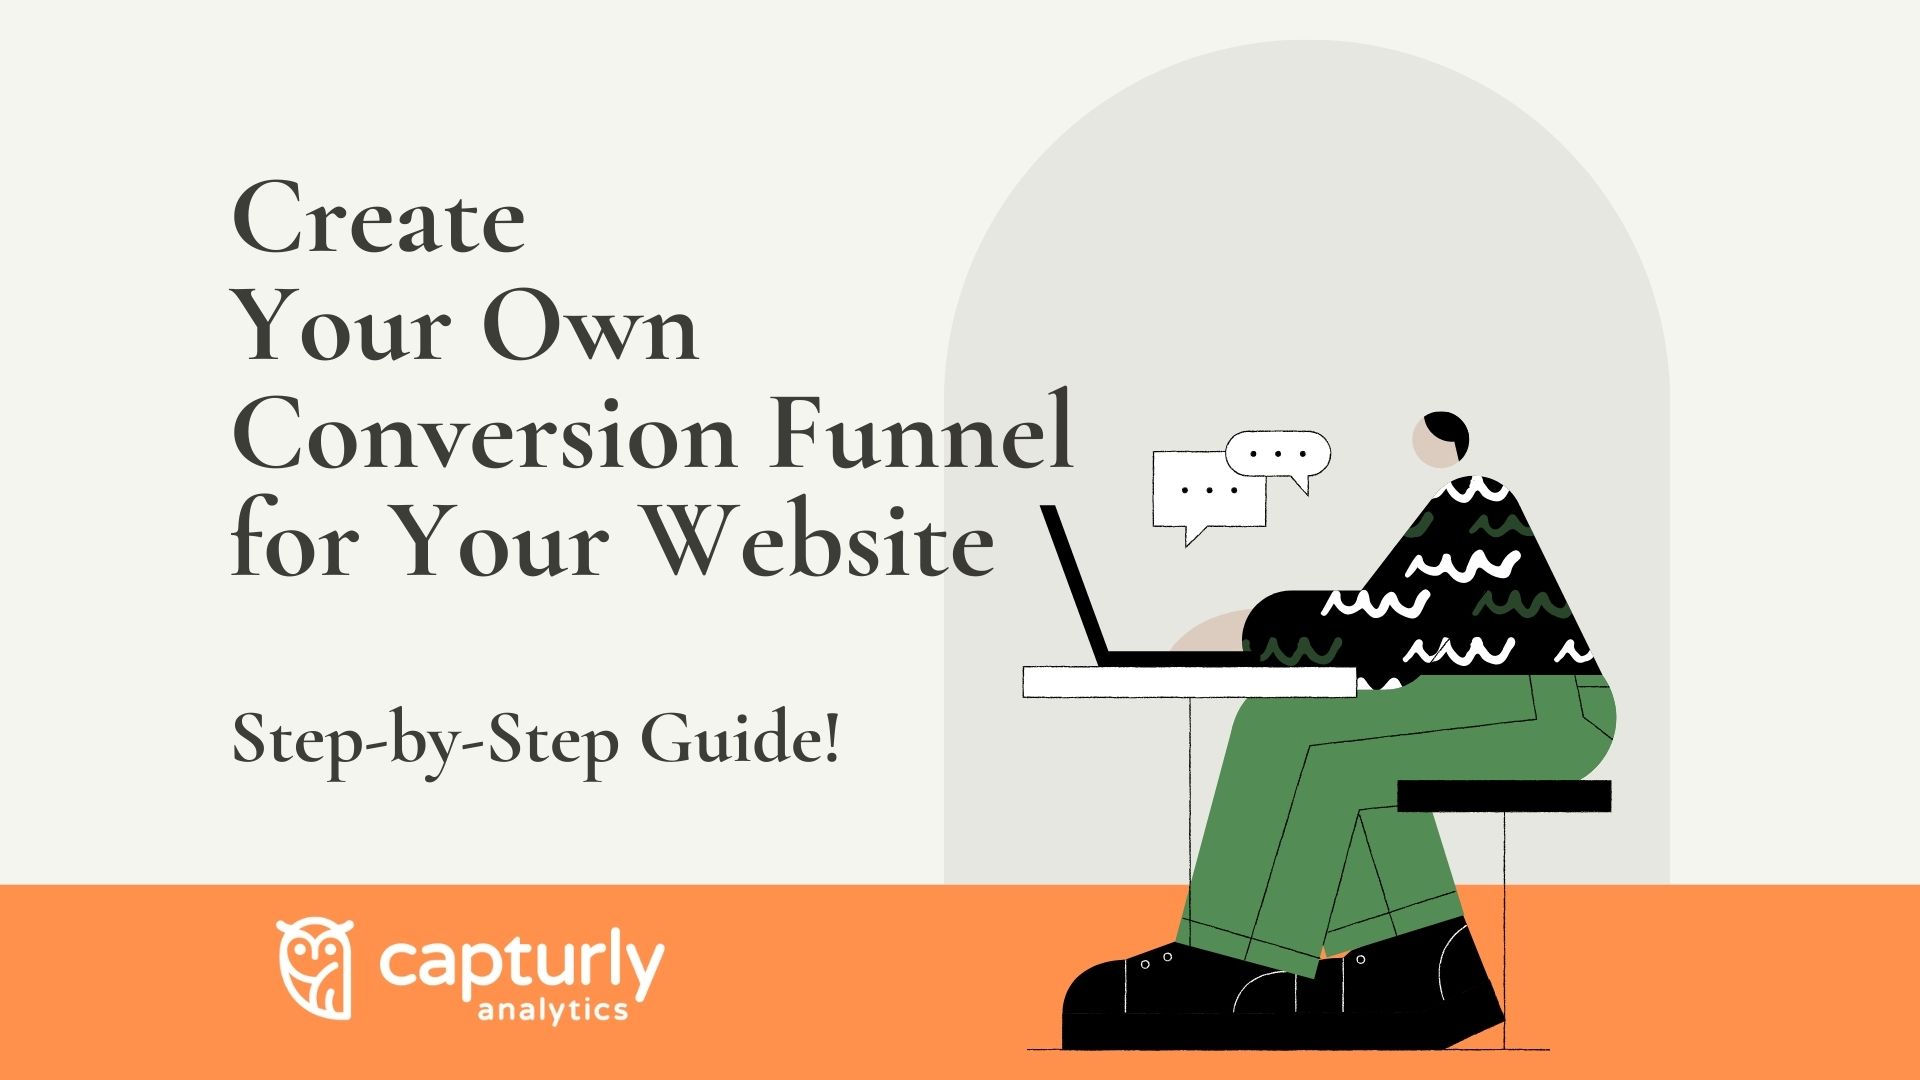 Create your own conversion funnel for your website